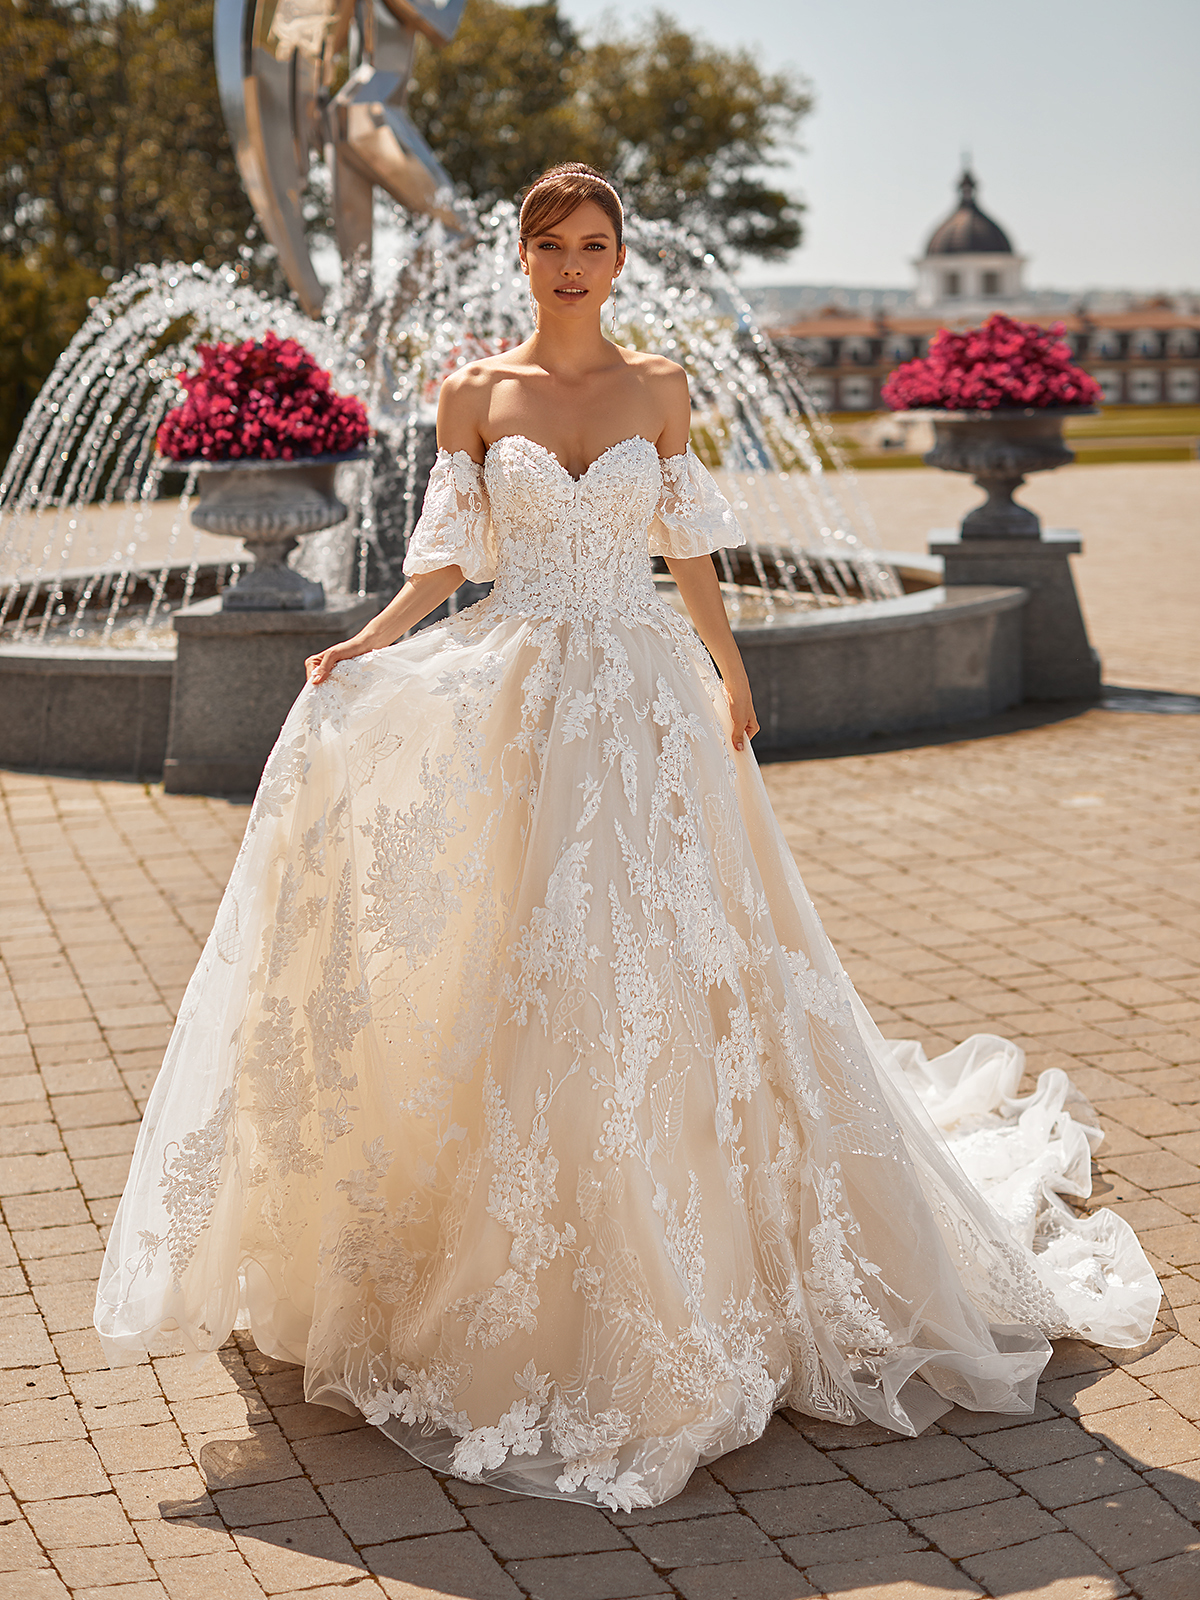 Choosing The Right Short Wedding Dress for your shapeCutting Edge Brides